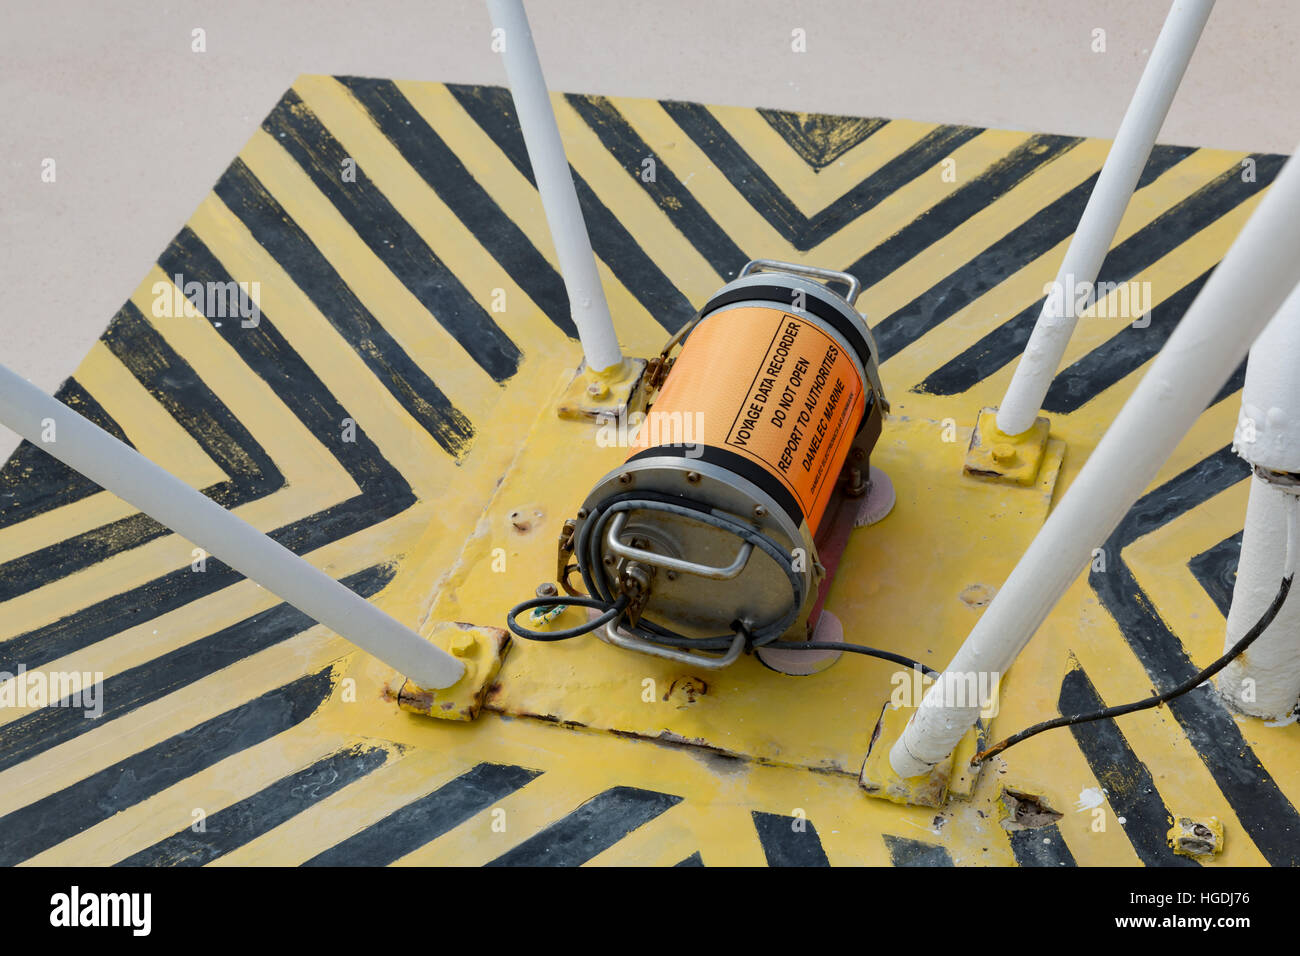 Maritime Black Box voice and data recorder mounted on ship foredeck. Stock Photo